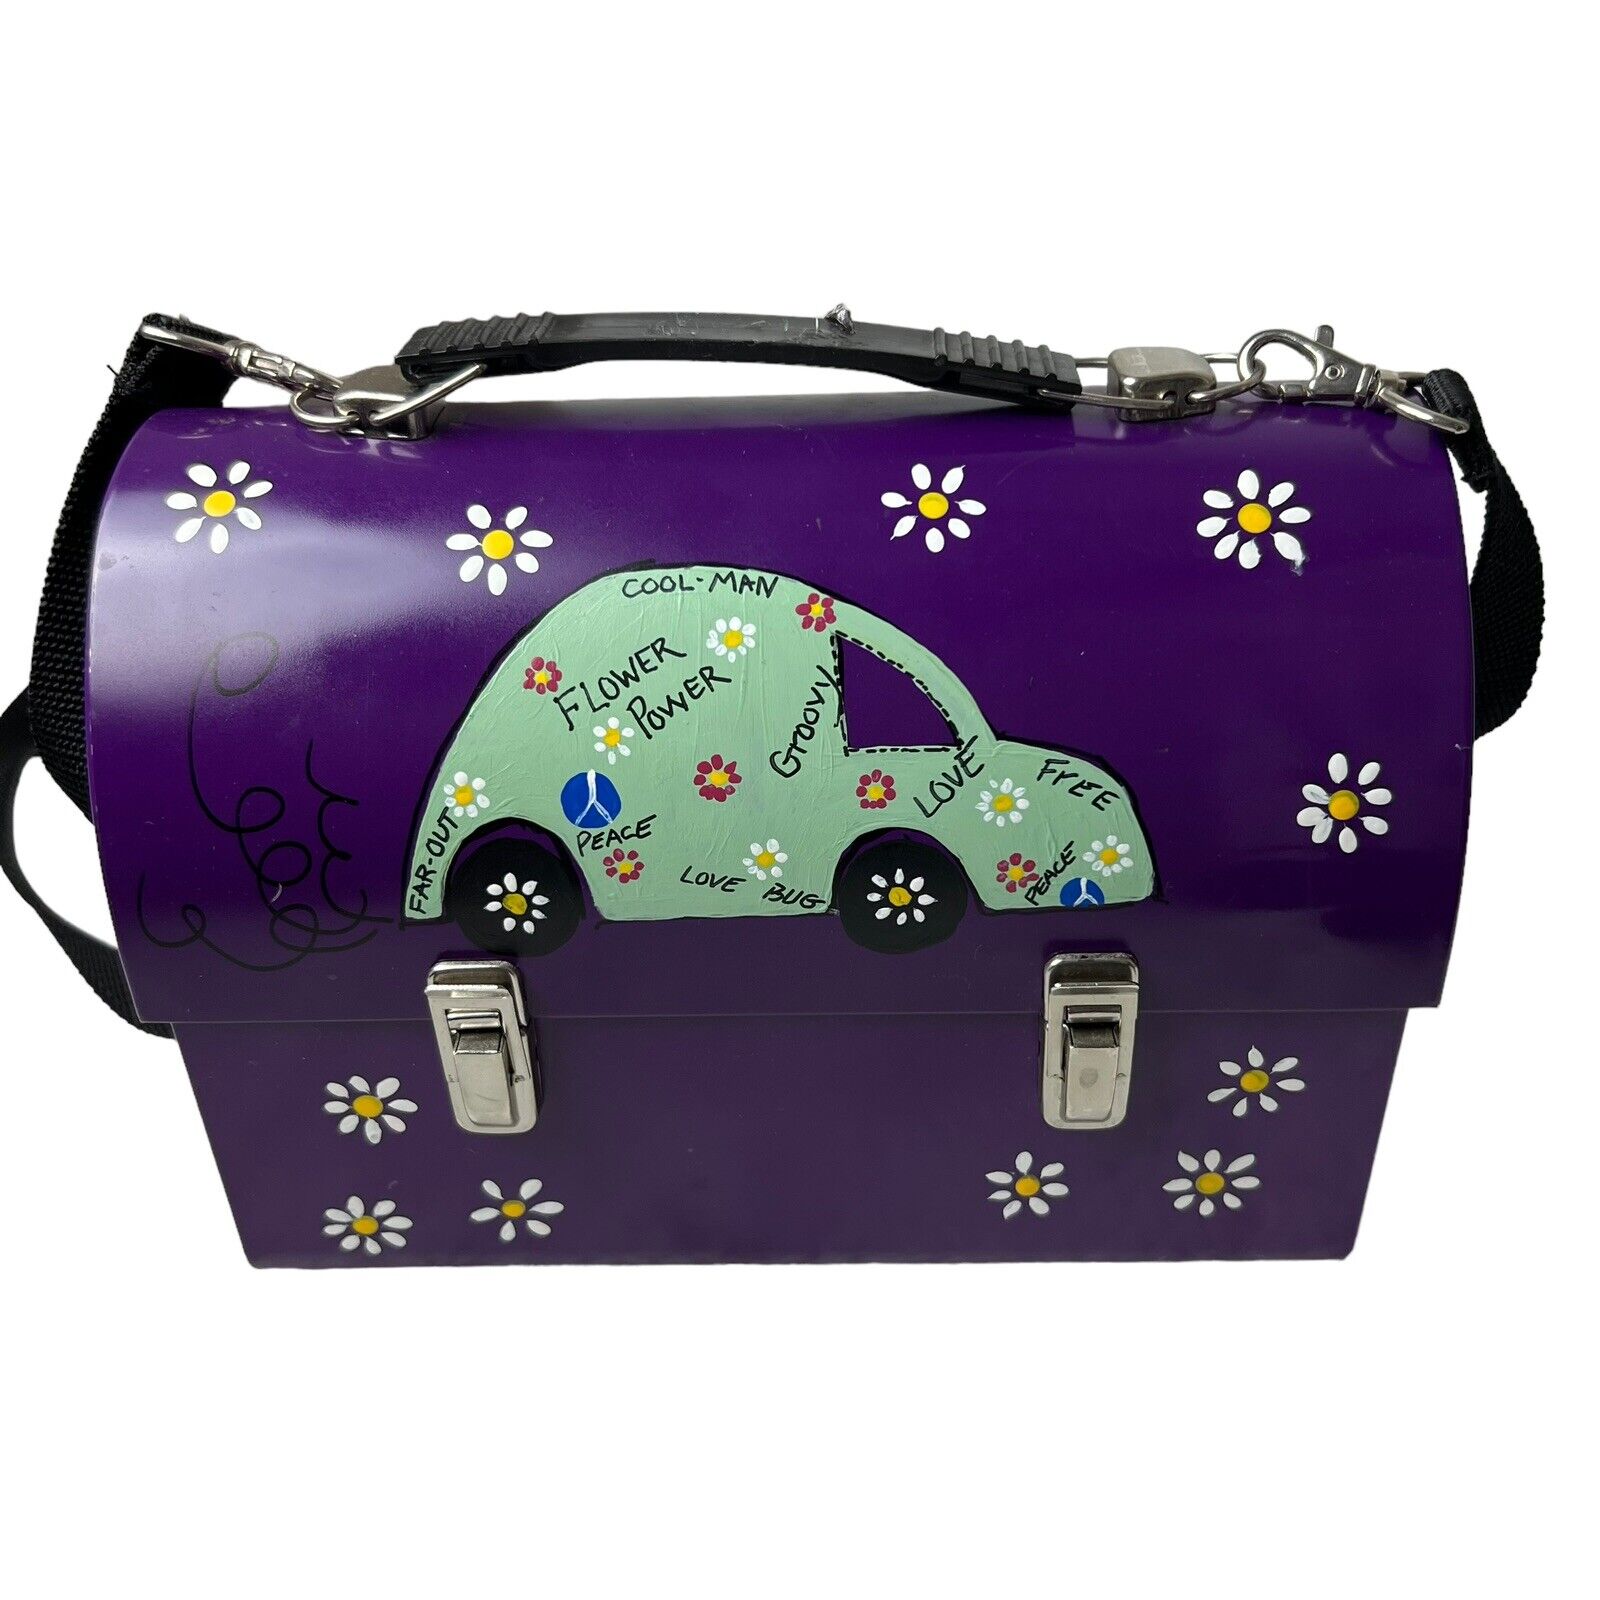 THERMOS Retro Granny Dome Metal Lunch Box Hand-painted Volkswagen/hippie/Flowers